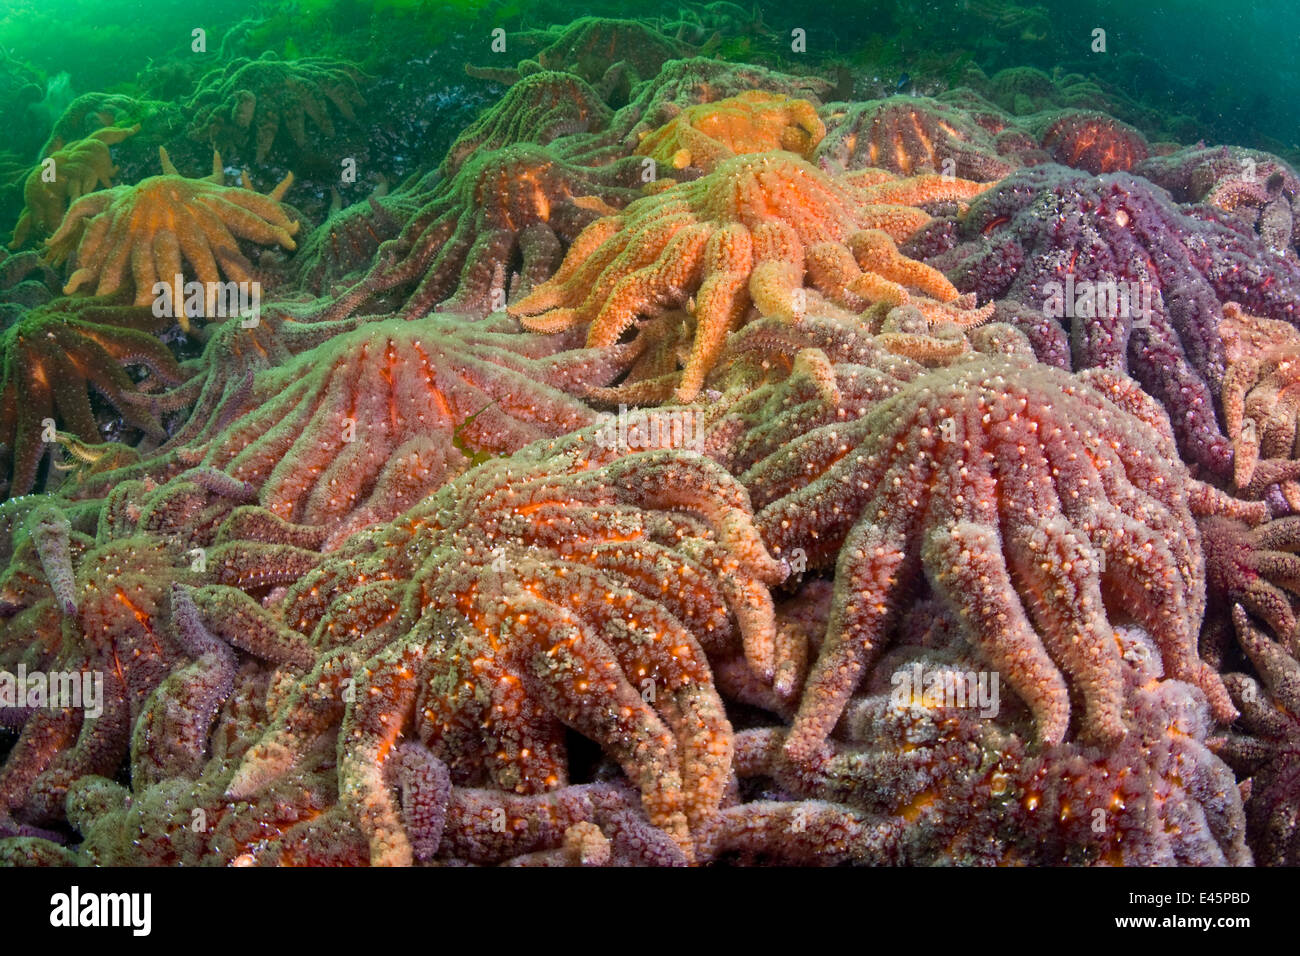 Large group of Sunflower sea stars (Asterias / Pycnopodia helianthoides) covering rock, pacific coast, Canada, August Stock Photo